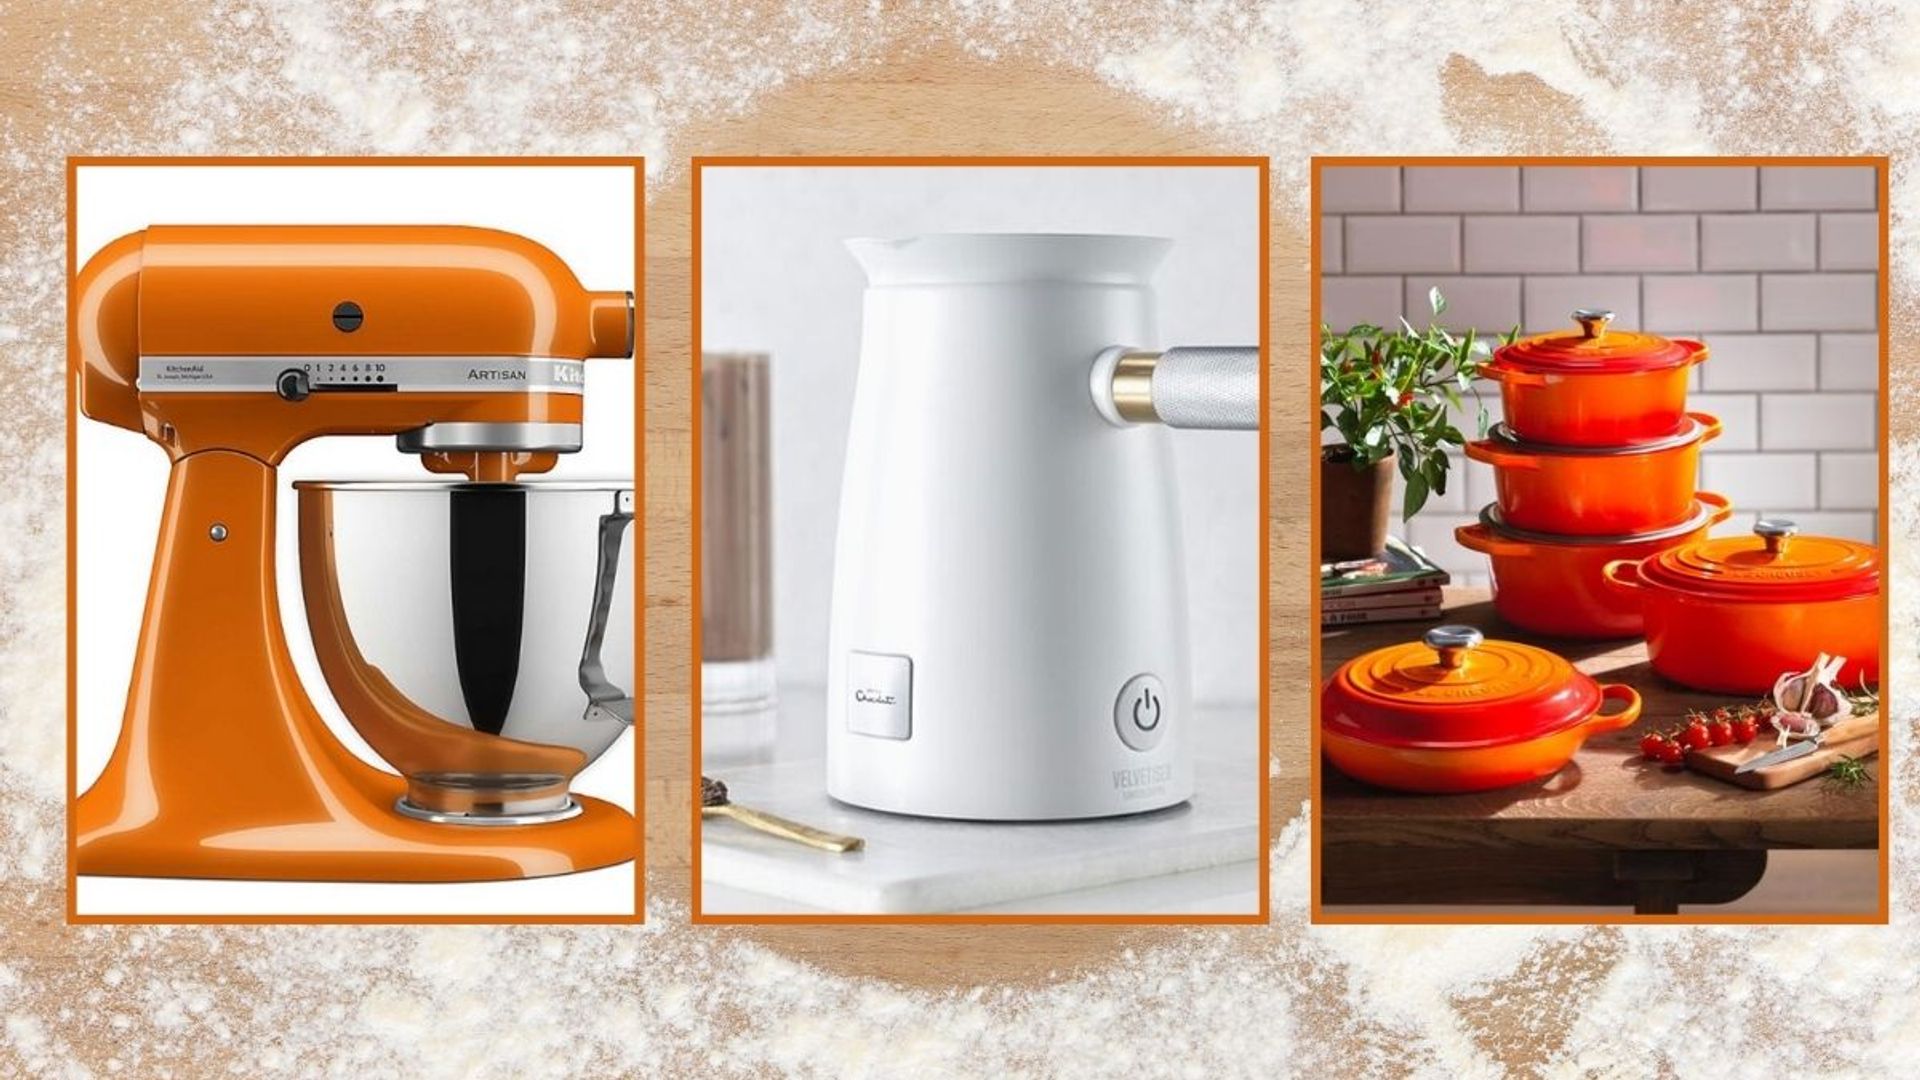 Kitchenware Cyber Monday deals 2021: From Le Creuset to Ninja, KitchenAid & more